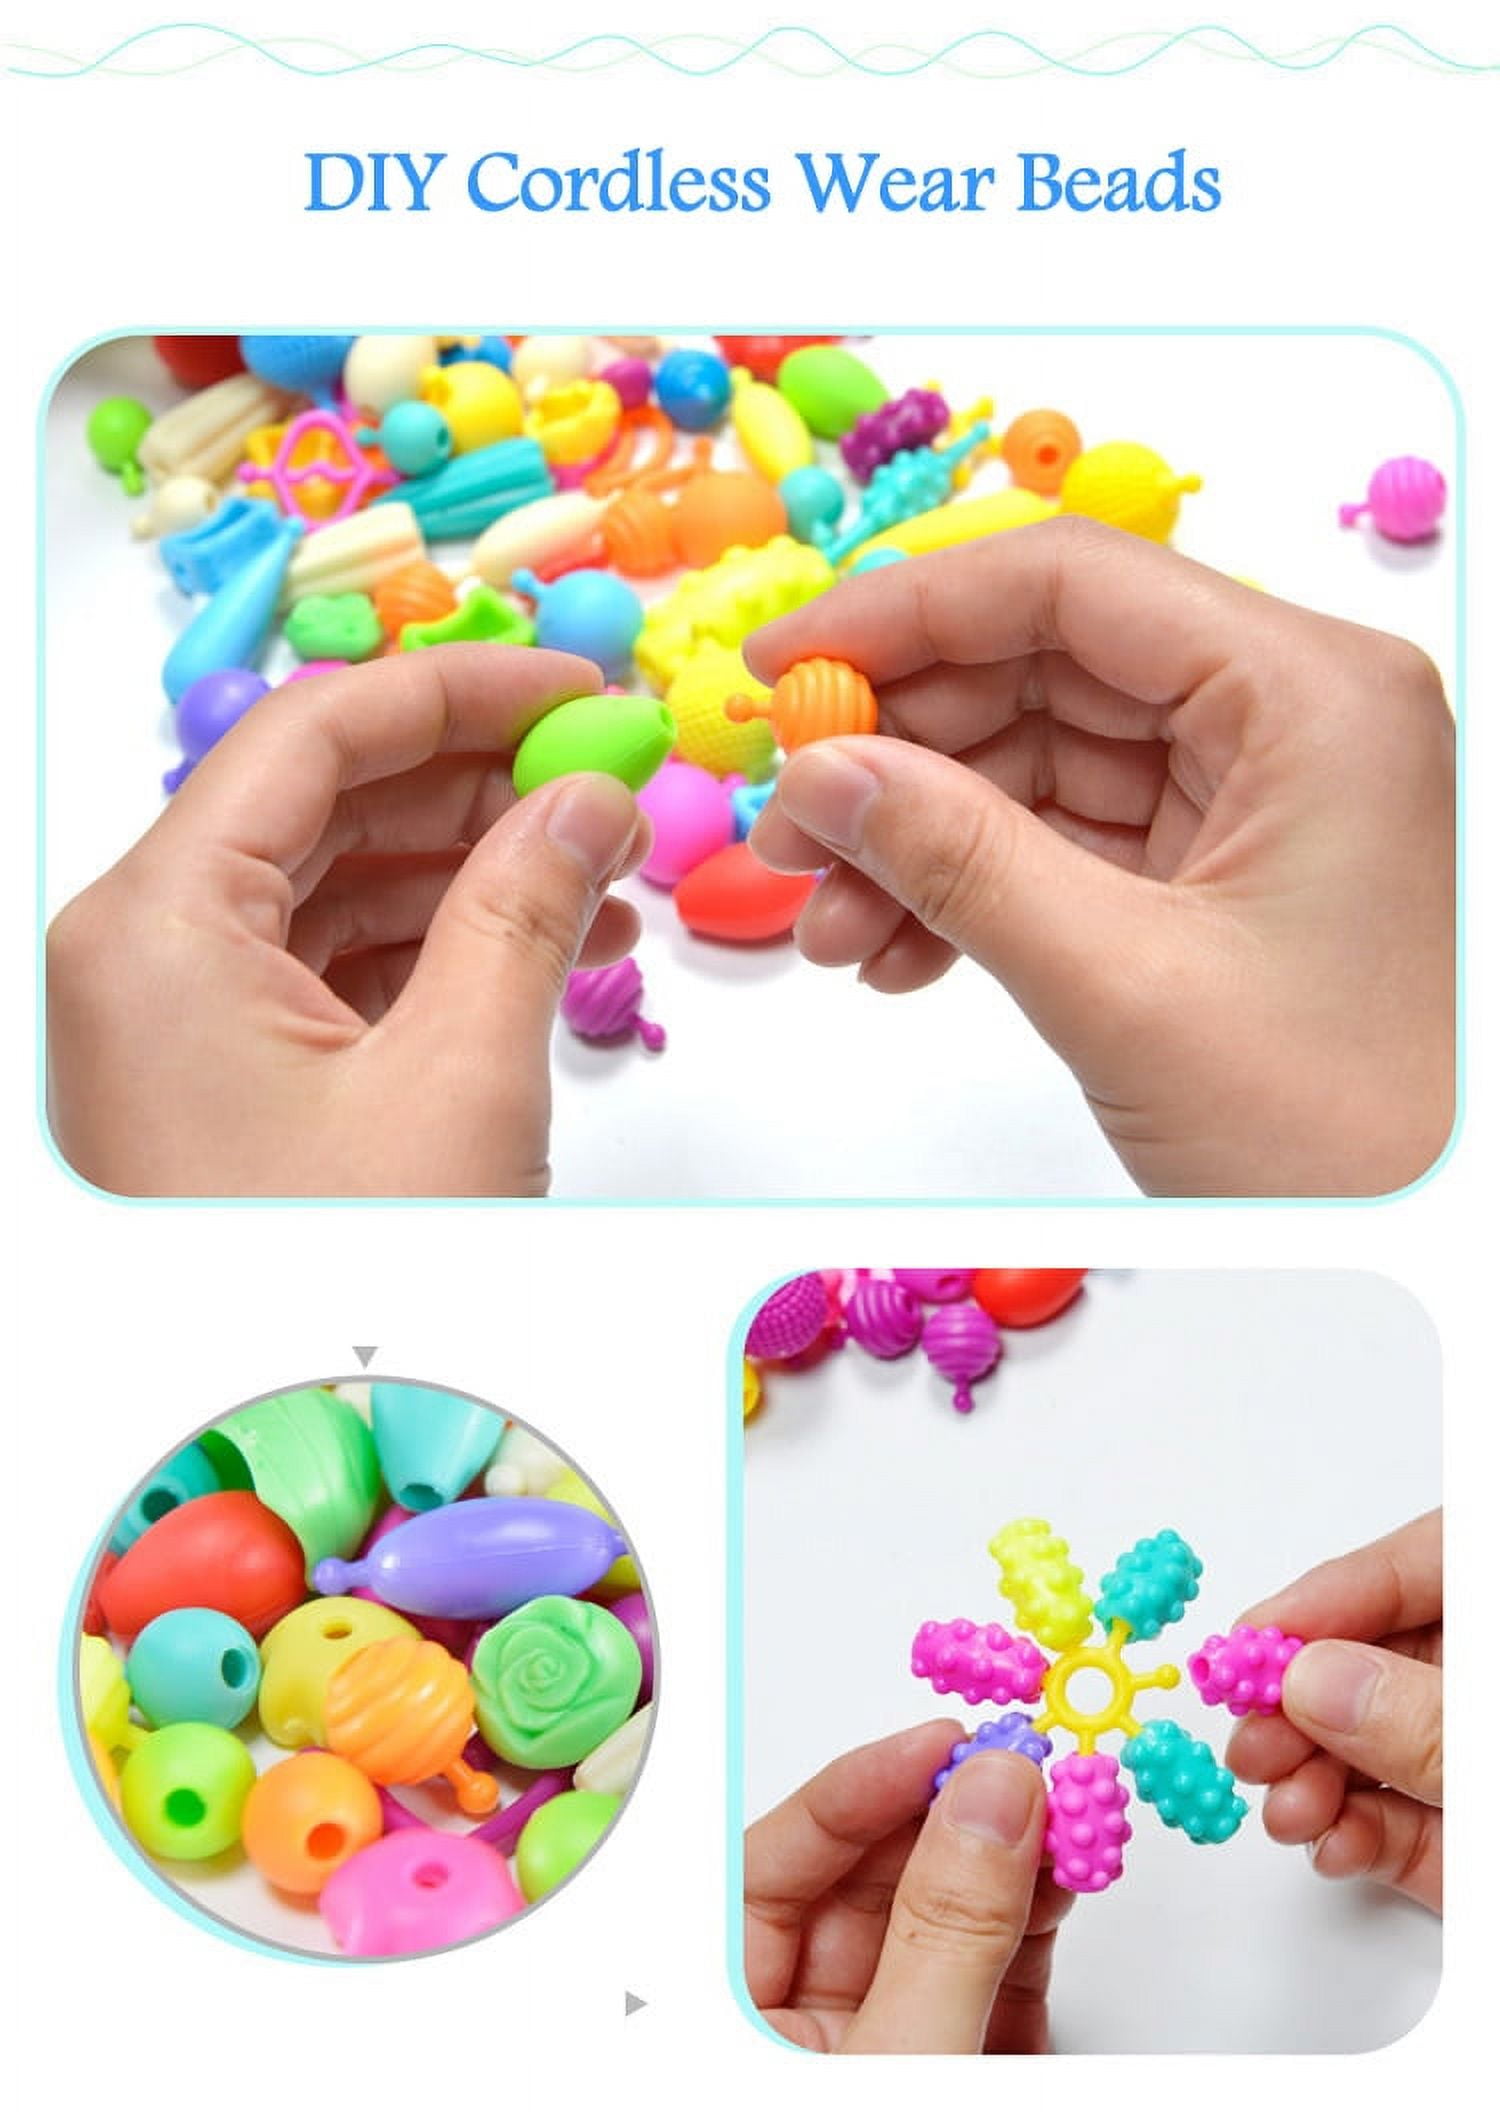 Seenda Snap Pop Beads for Girls Toys - 500 PCS Kids Jewelry Making Kit  Pop-Bead Art and Craft Kits DIY Bracelets Necklace Hairband and Rings Toy  for